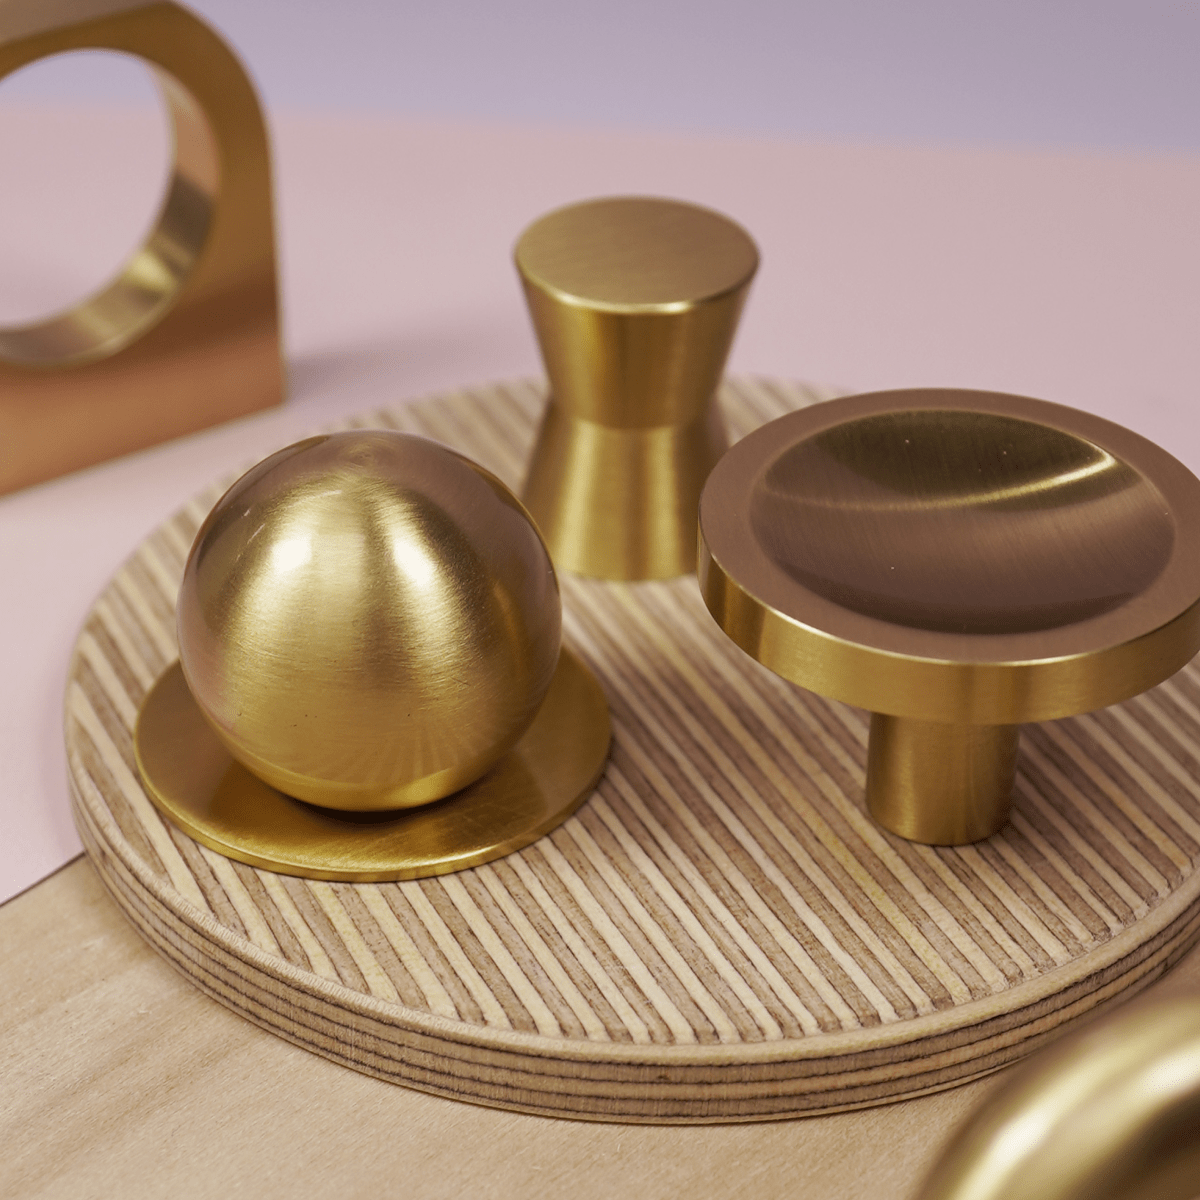 Classic Sphere Brushed Brass Cabinet Knob + Reviews